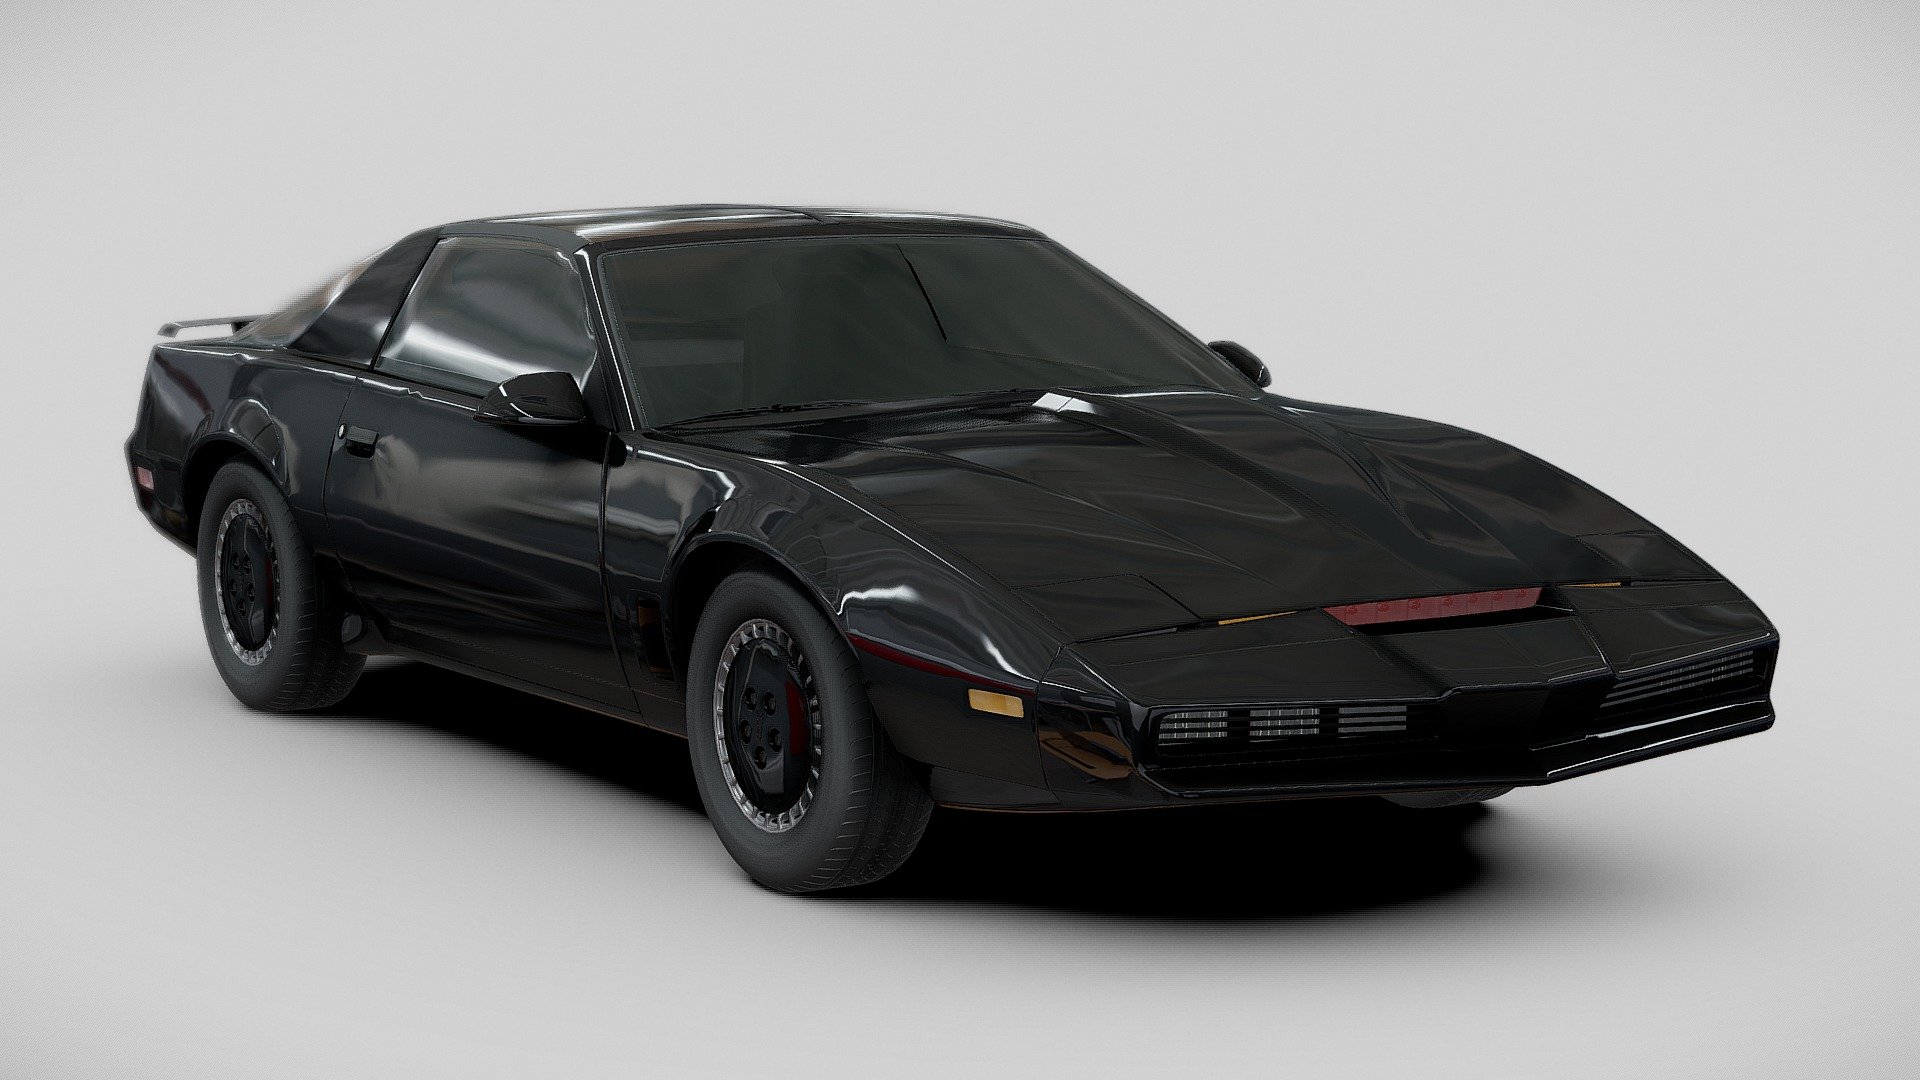 3d car model of Pontiac Firebird KITT 1982

.

/ high poly / fully editable / rigable /

by getting this model you have full control on meshes and materials

you can even subdivide all parts for having better looking details.

.

you can support me by folowing me on instagram

my ig: ZIRODESIGN - Pontiac Firebird KITT 1982 - Buy Royalty Free 3D model by ZIRODESIGN 3d model